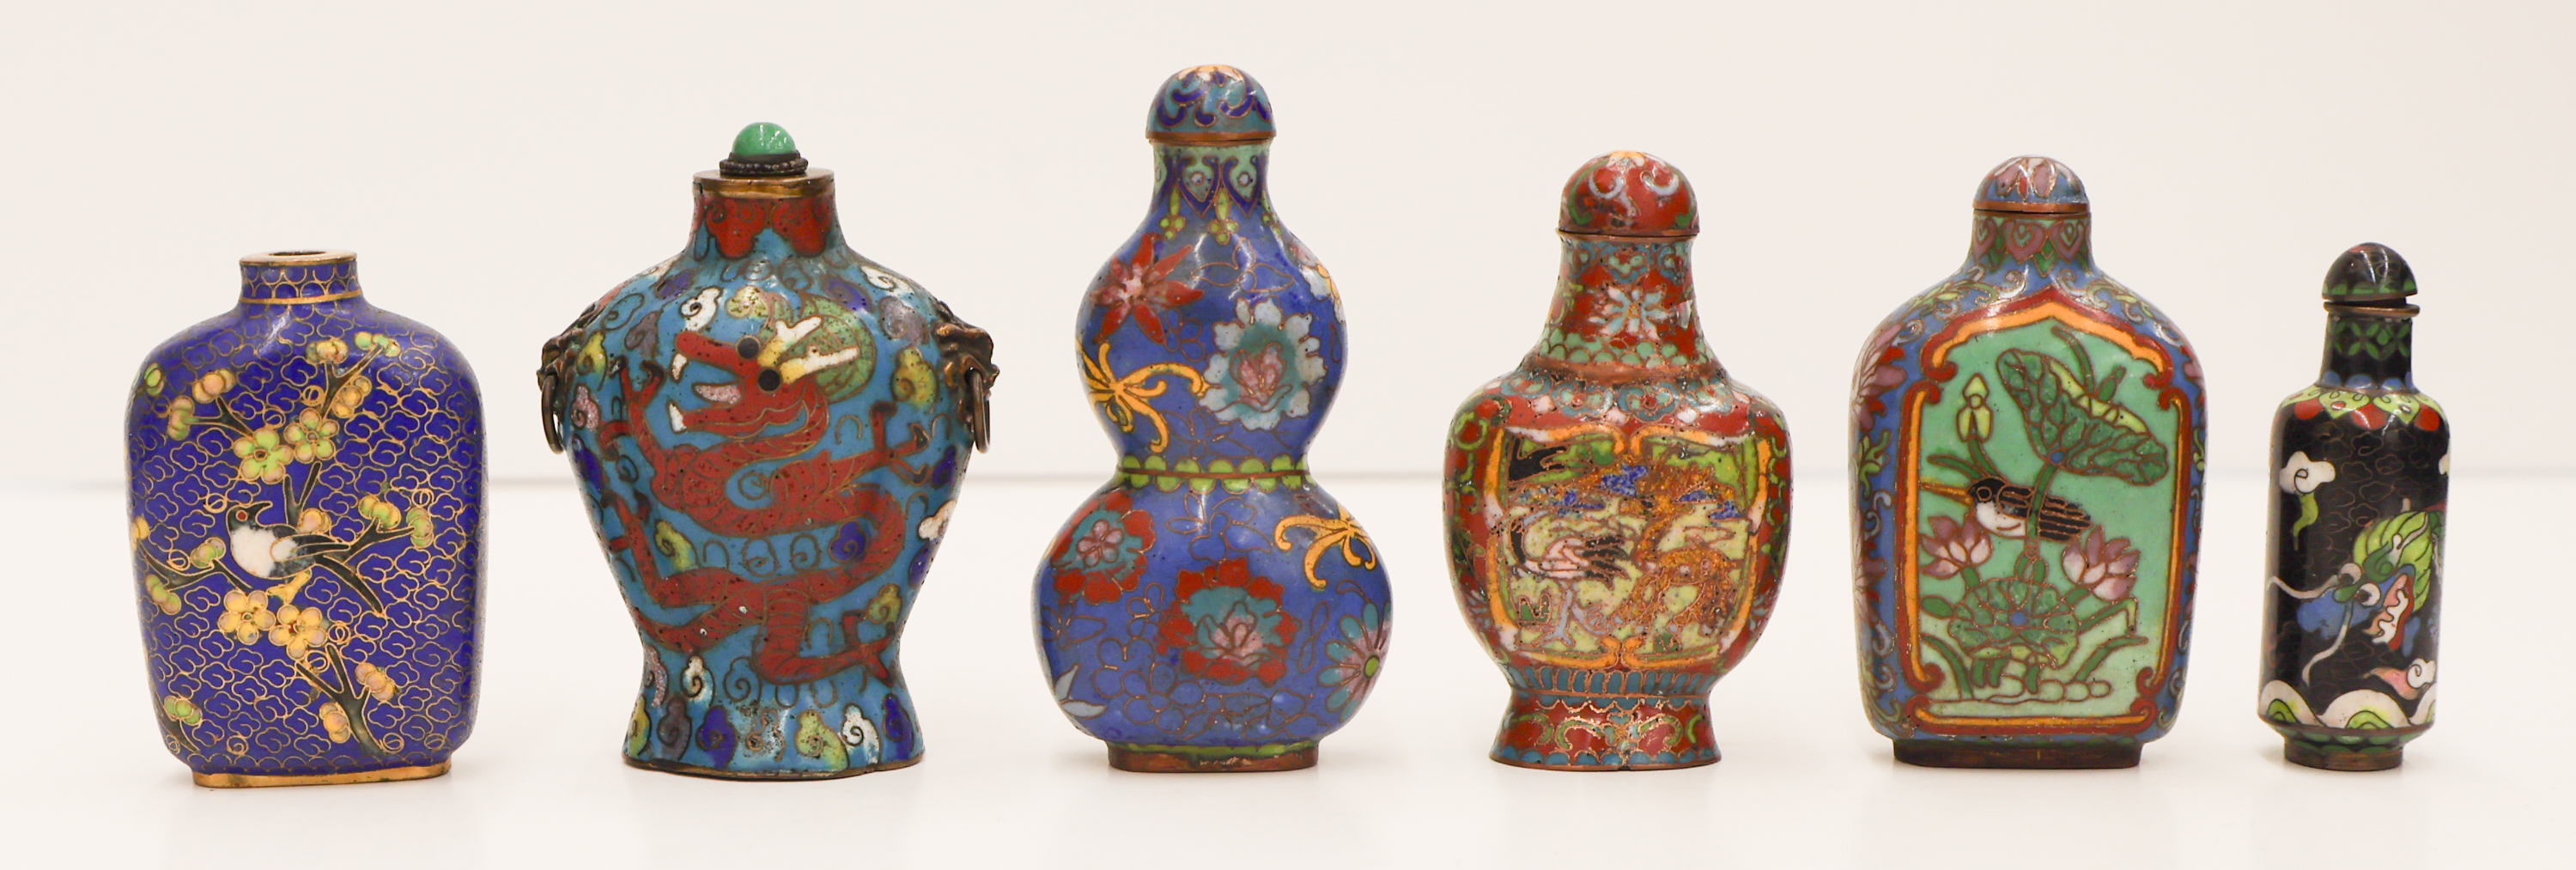 6pc Chinese Cloisonne Snuff Bottles 3afe40